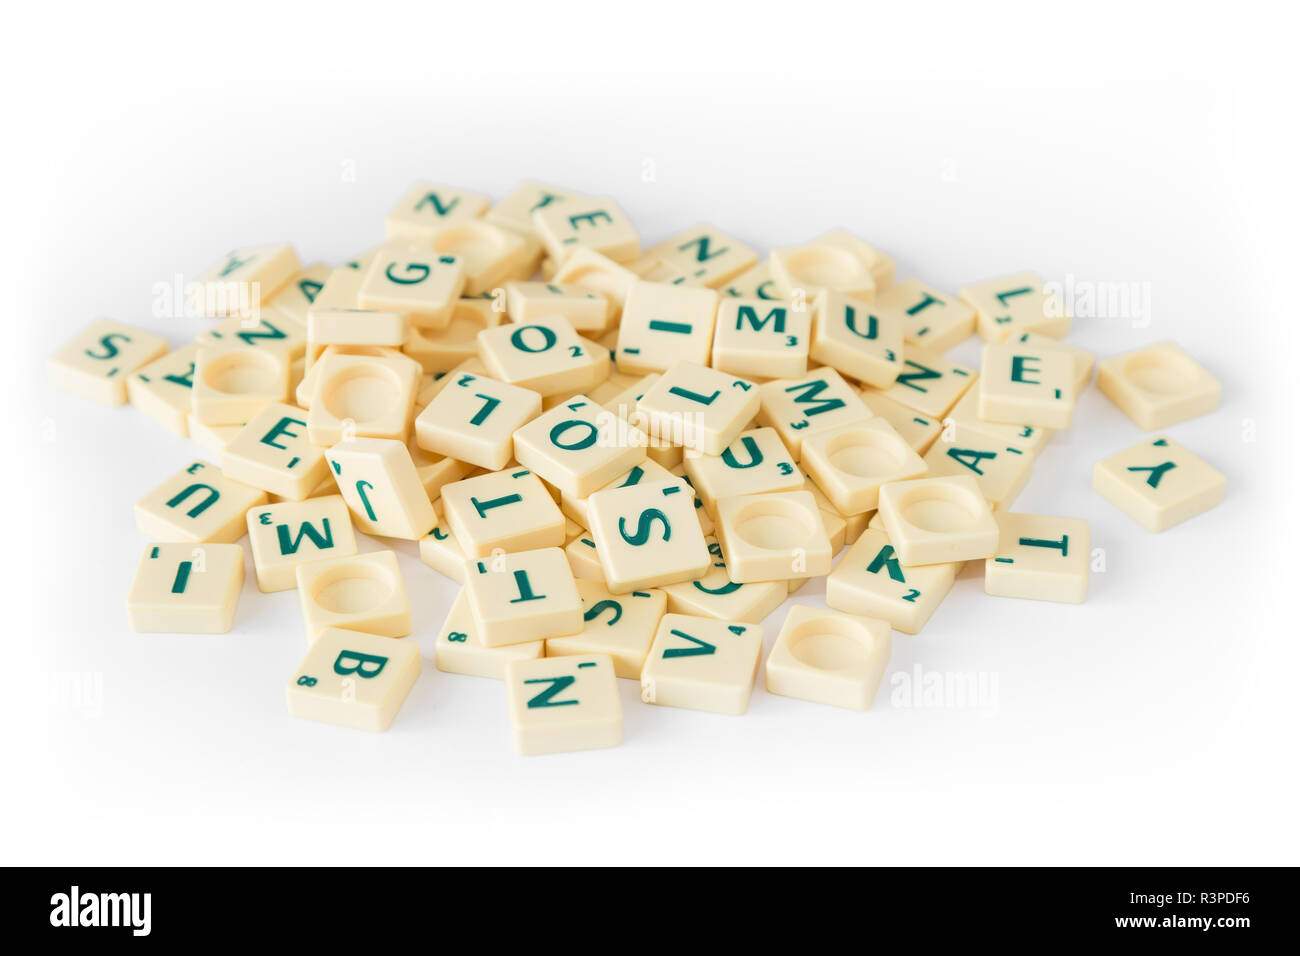 Pile of random Scrabble game letter tiles with score value mixed up, isolated on white background. Stock Photo